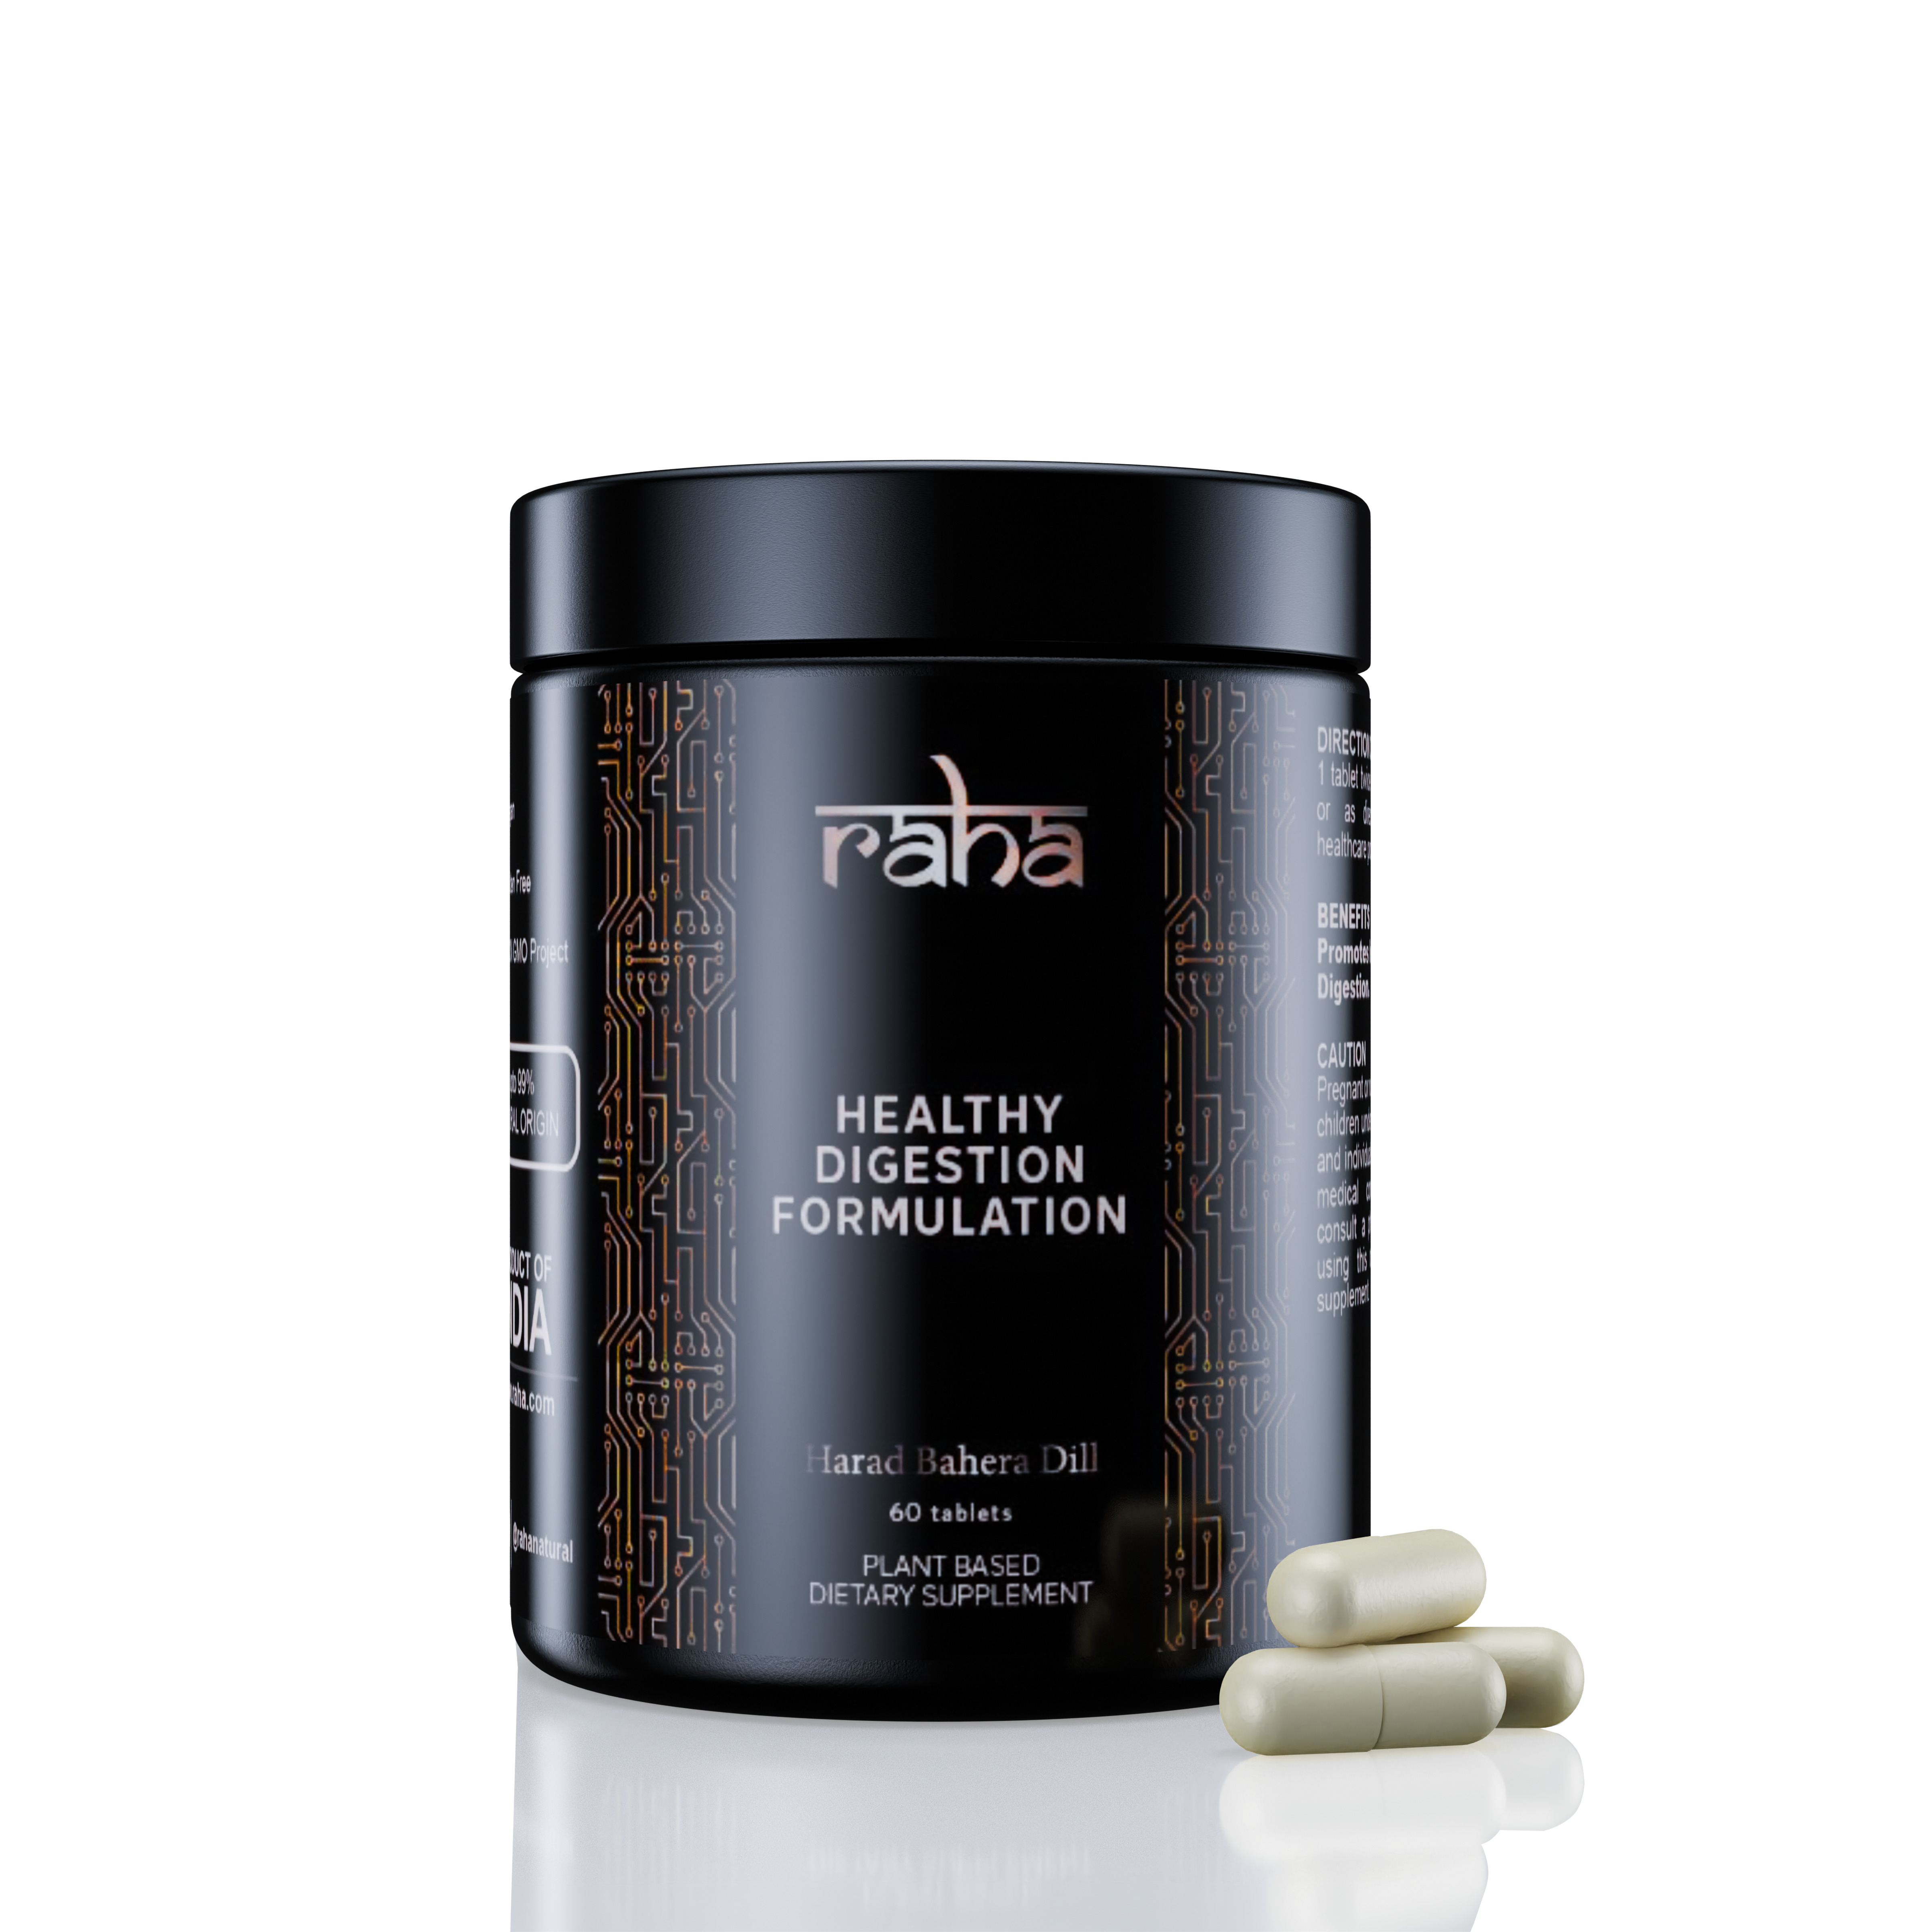 Raha healthy digestion formulation for improving digestion and reduce bloating